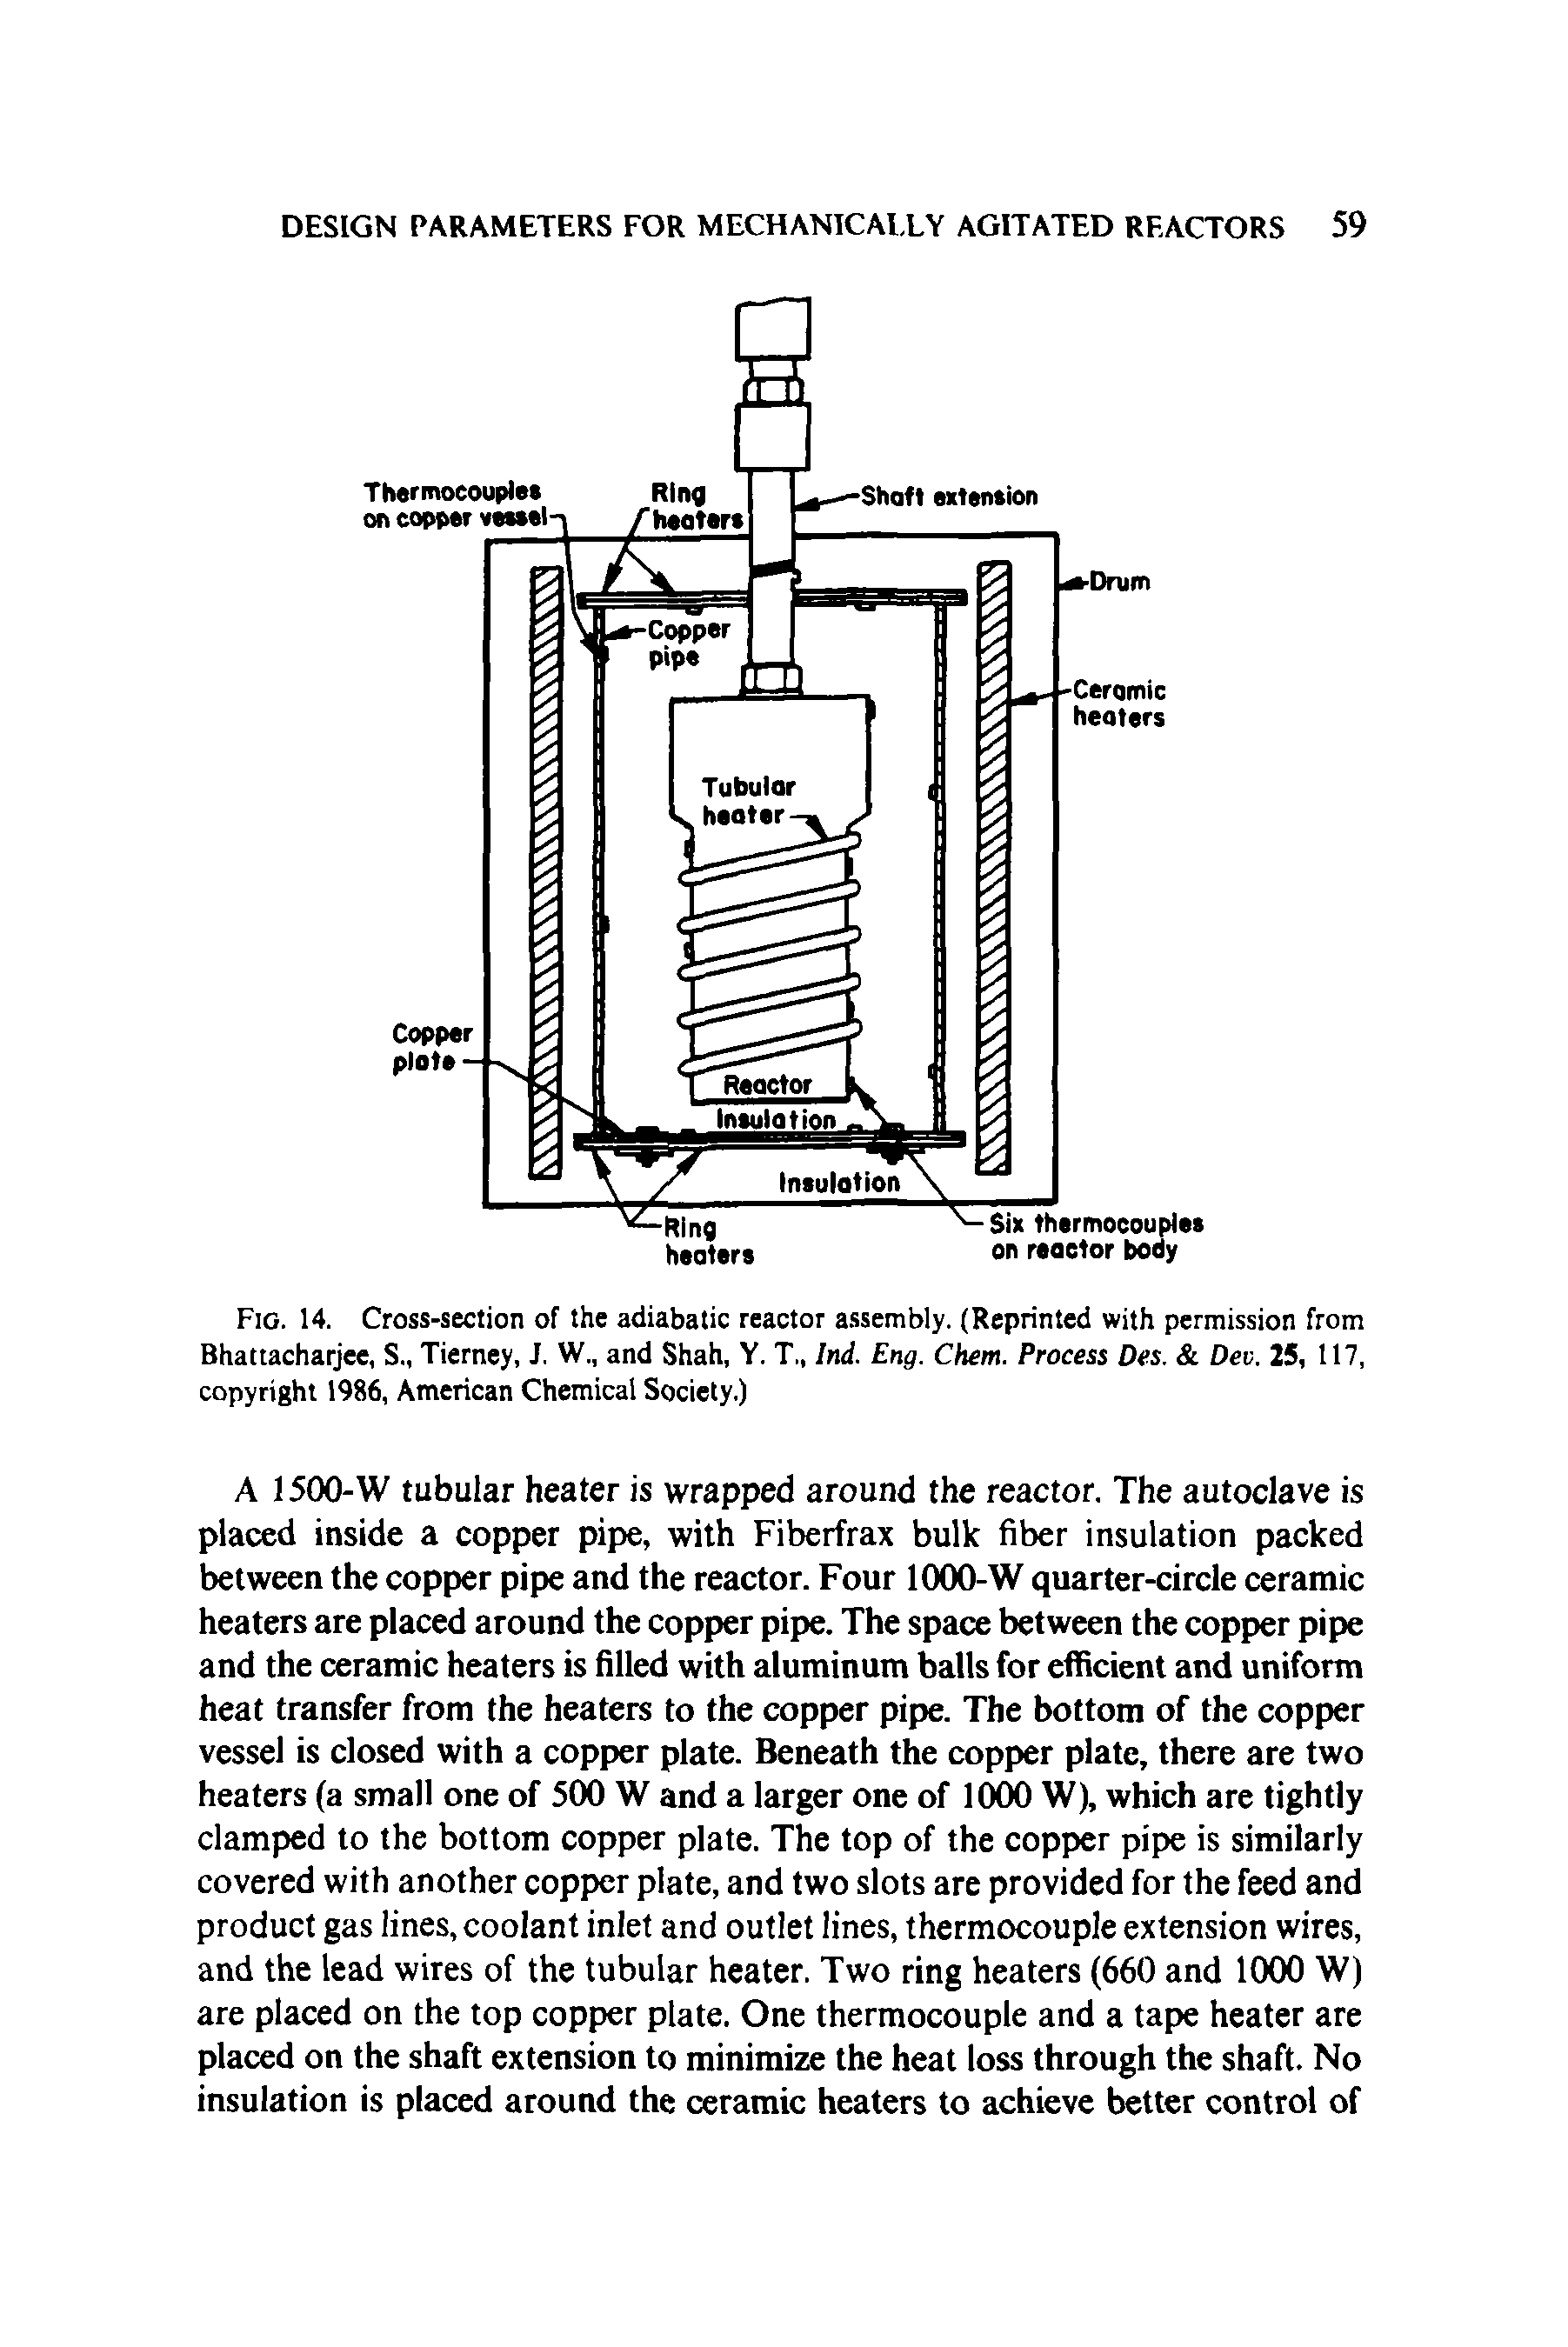 Fig. 14. Cross-section of the adiabatic reactor assembly. (Reprinted with permission from Bhattacharjee, S., Tierney, J. W., and Shah, Y. T., Ind. Eng. Chem. Process Des. Dev. 25, 117, copyright 1986, American Chemical Society.)...